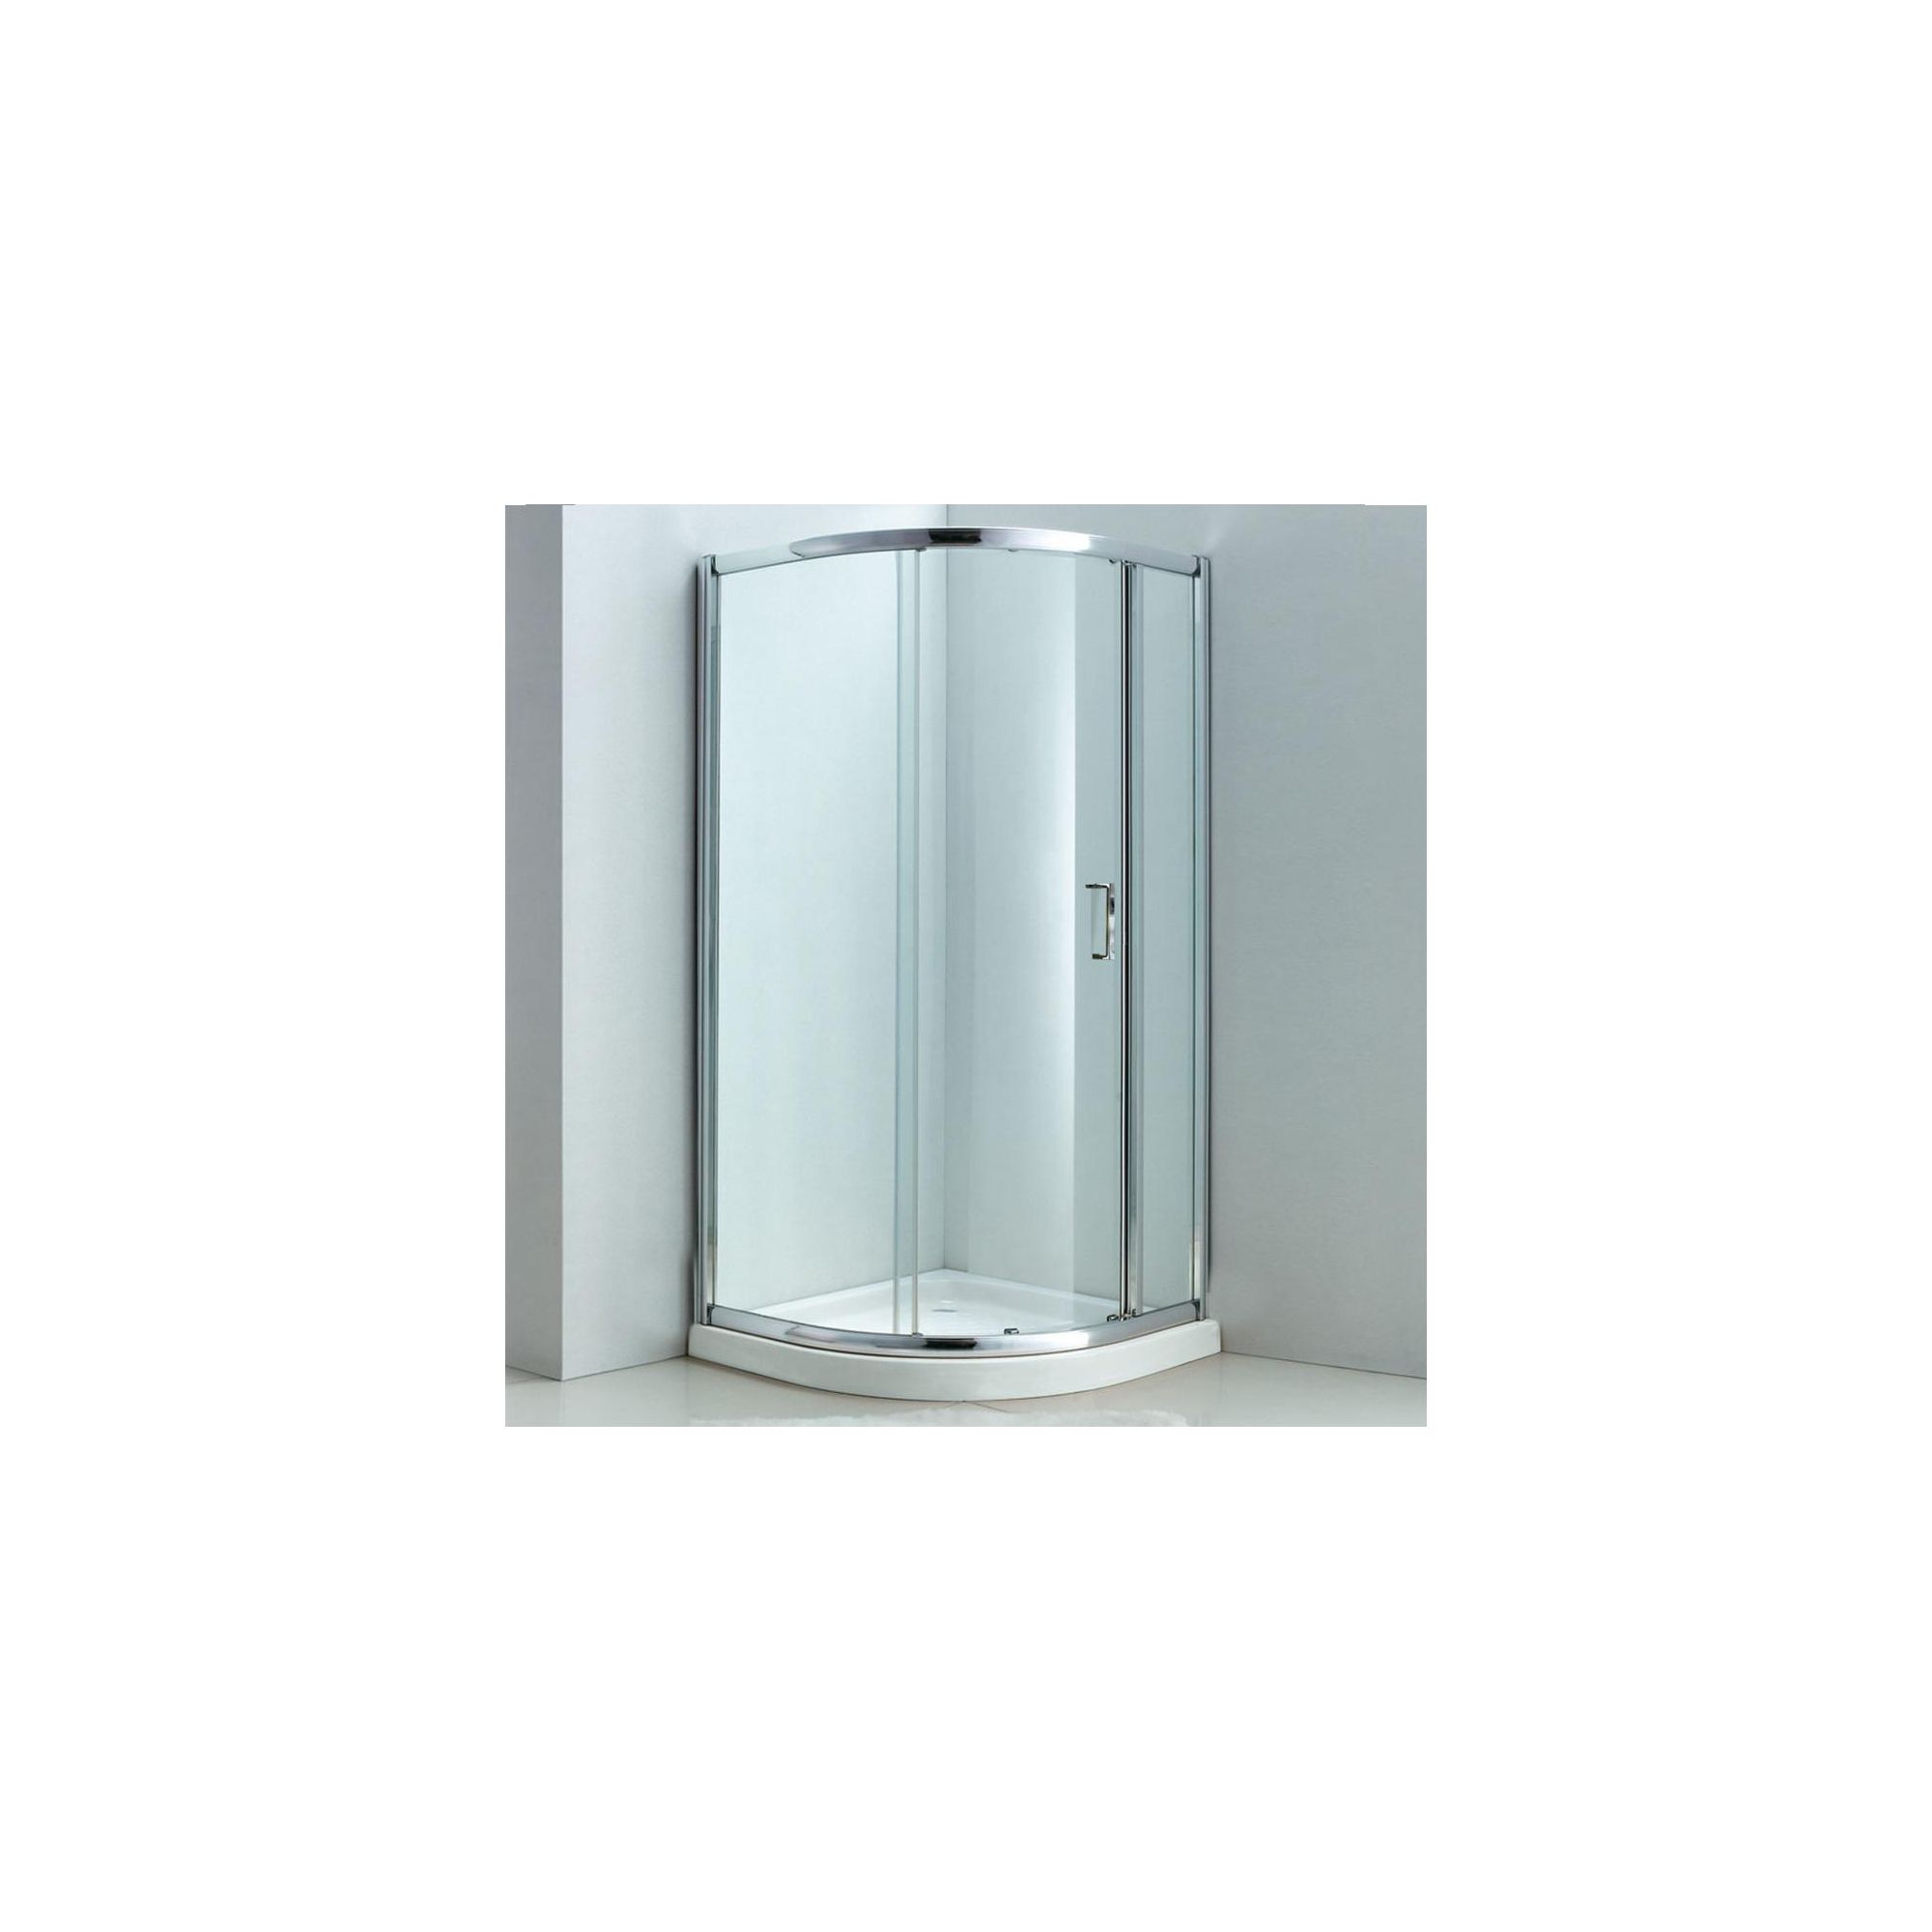 Duchy Style Single Quadrant Shower Door, 800mm x 800mm, 6mm Glass at Tesco Direct